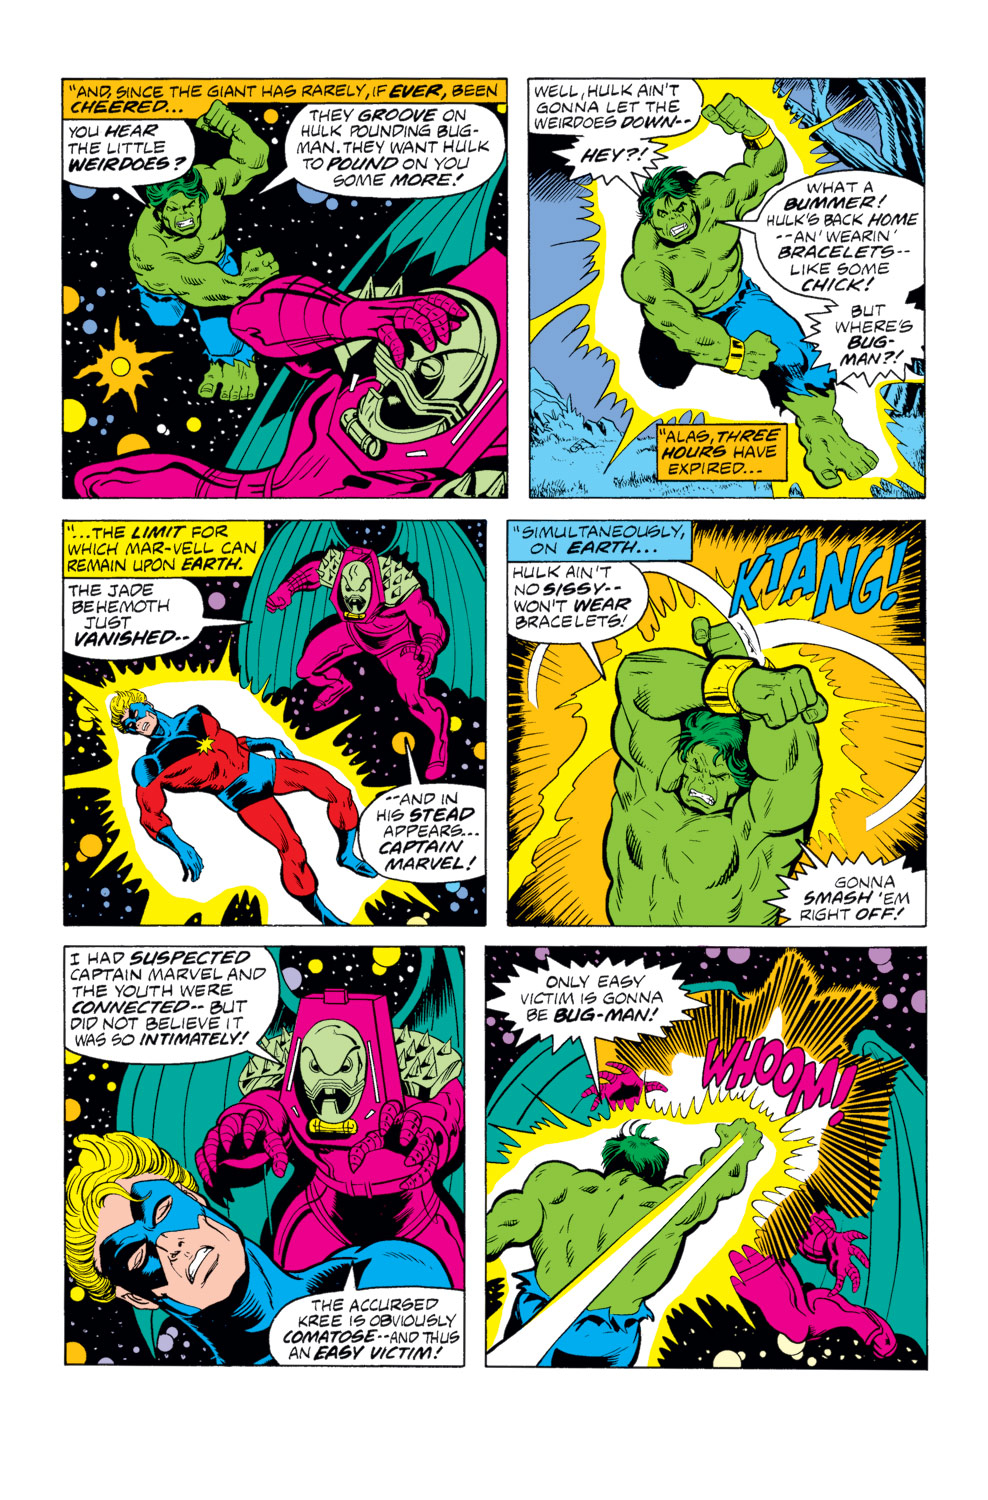 What If? (1977) issue 12 - Rick Jones had become the Hulk - Page 25